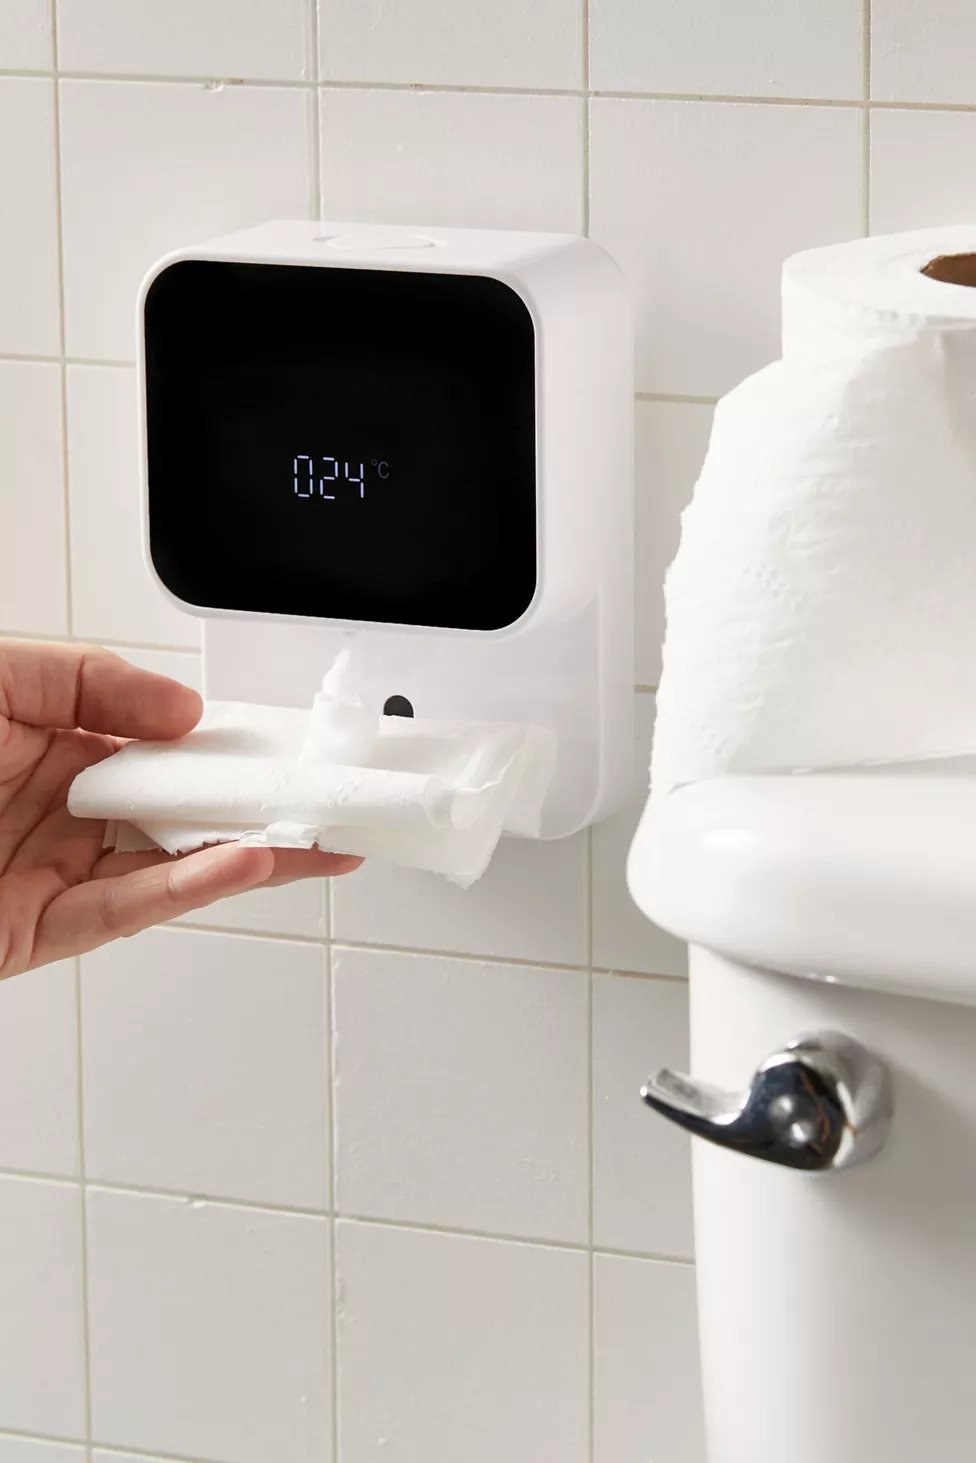 hand holding dry tissue paper under the wall mounted foam dispenser. the screen shows the room&#x27;s temperature.